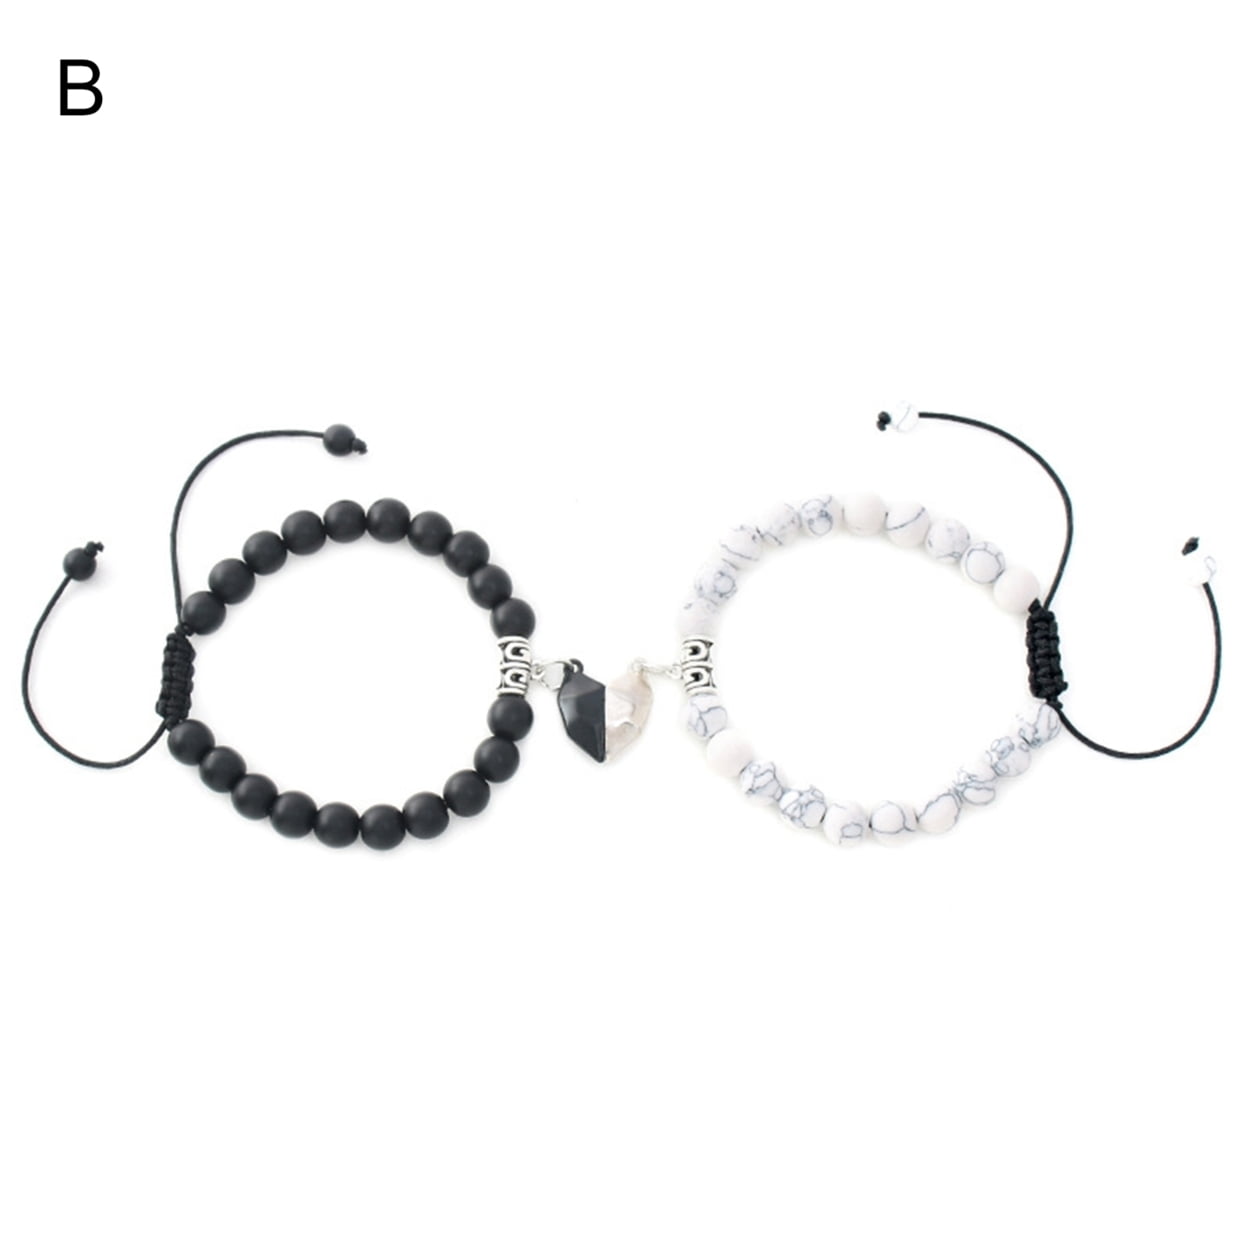 Magnetic Heart Bracelets - Couples Jewelry Gift Set of 2 – Curious Draft